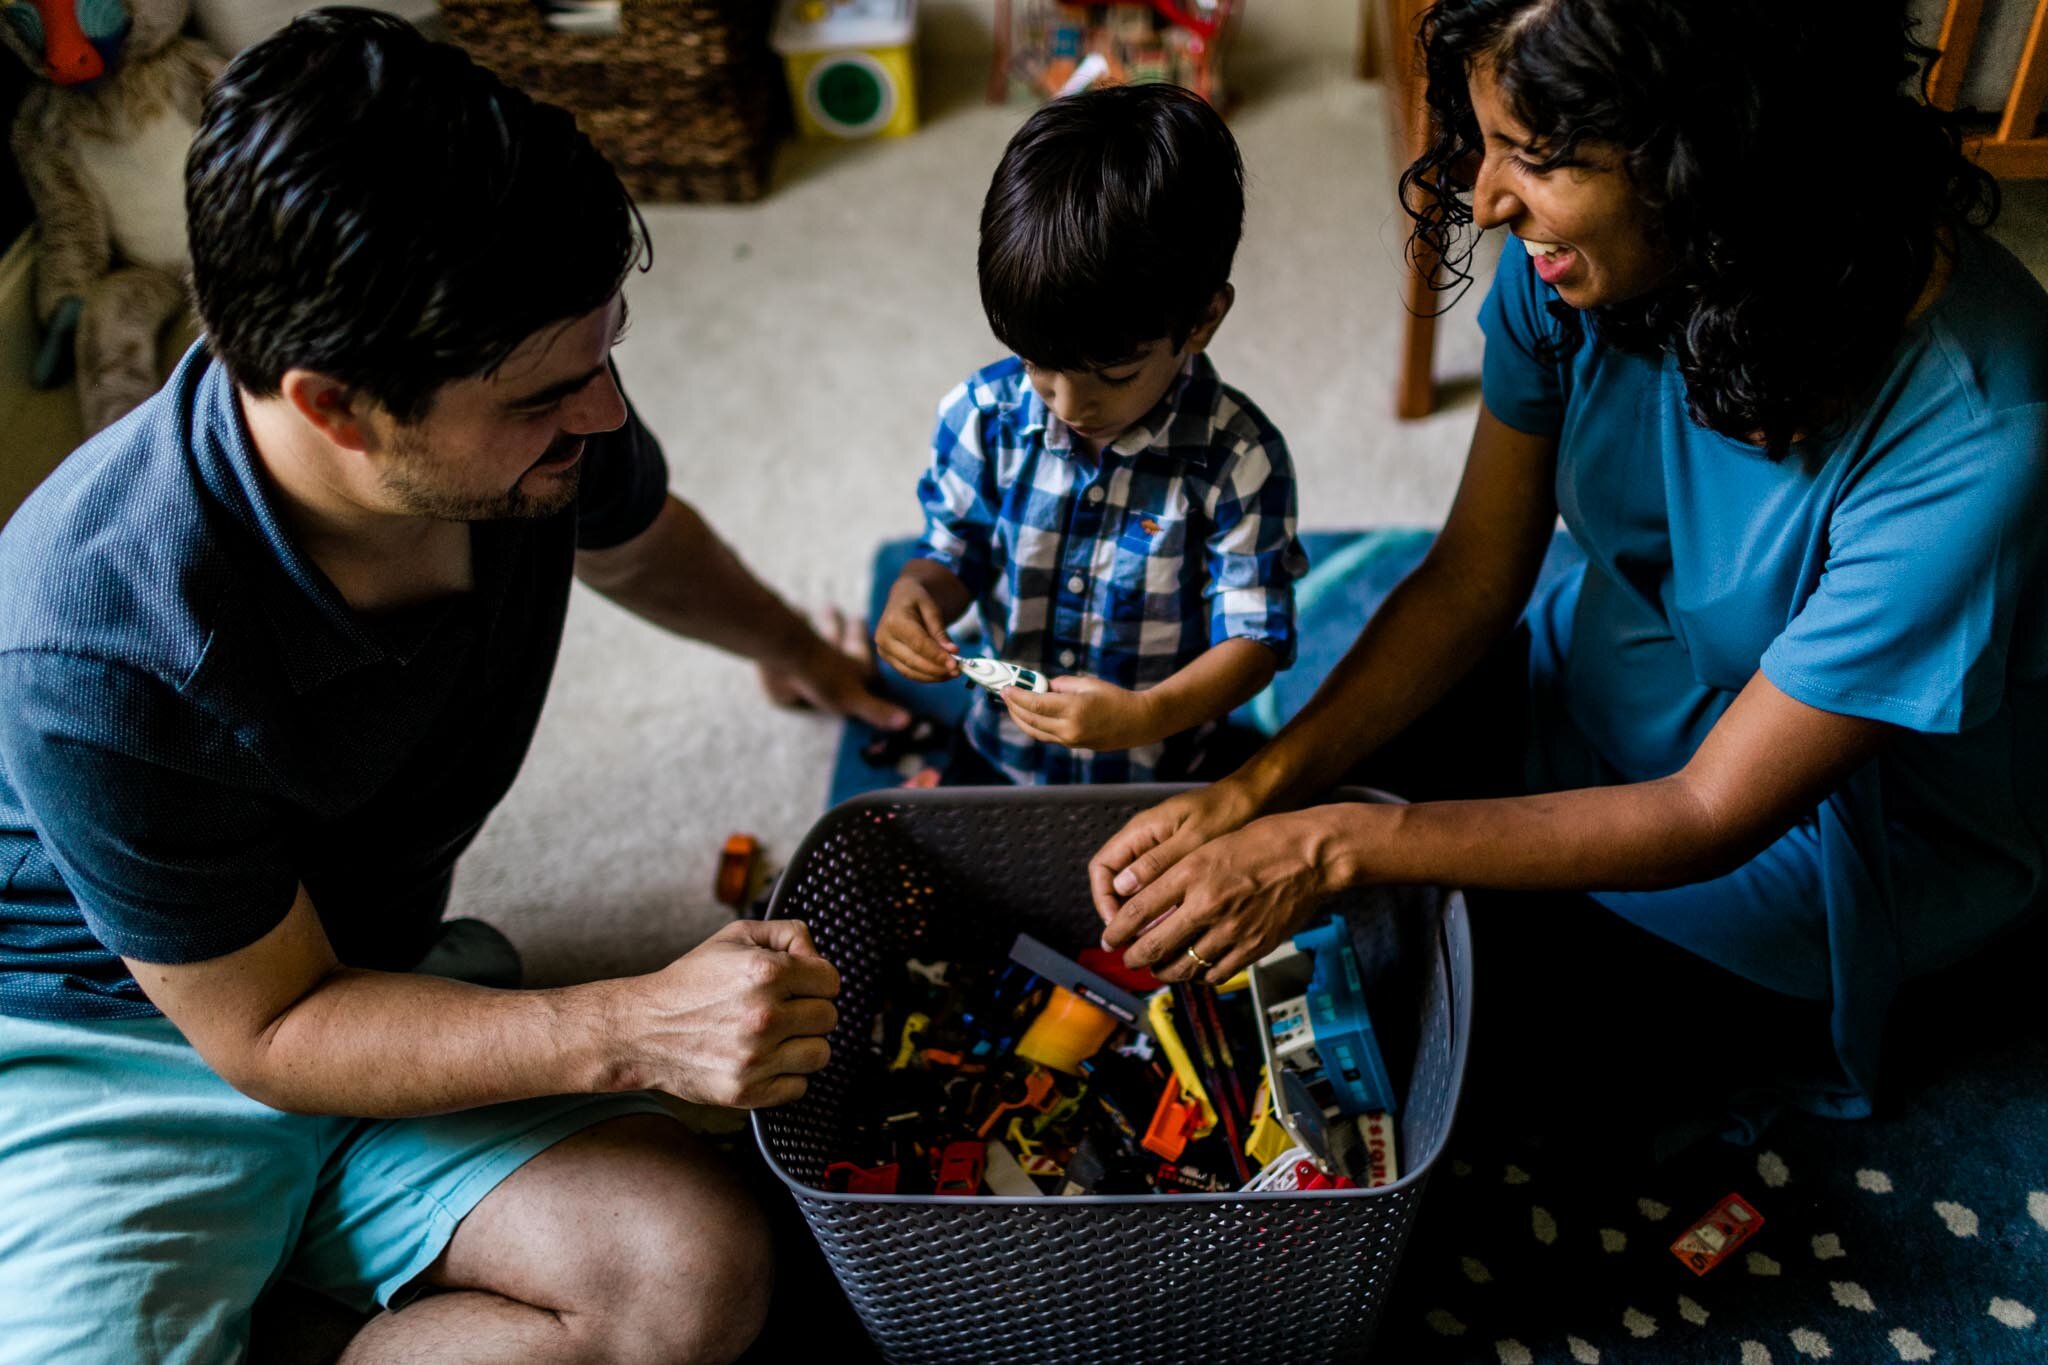 Durham Photographer | By G. Lin Photography | Family playing with toy box together